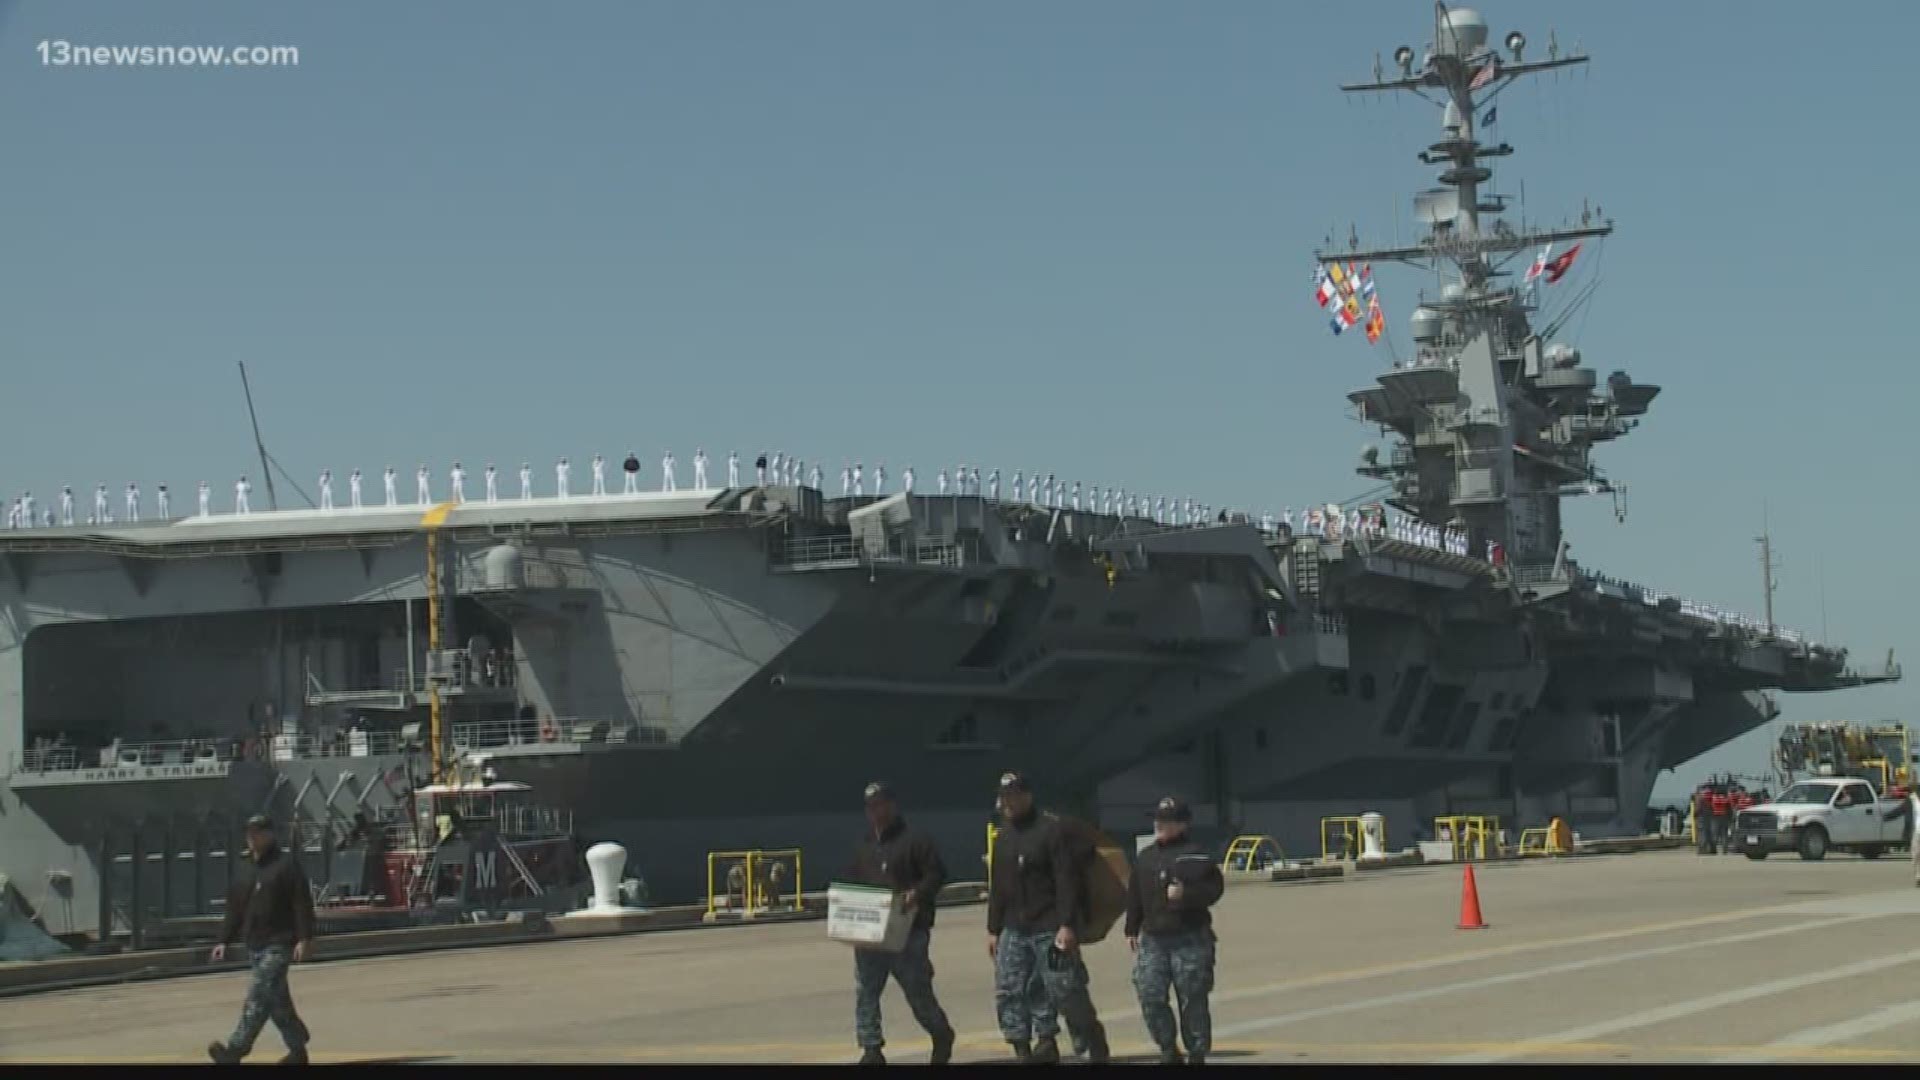 More than 65-hundred sailors from the USS Harry S. Truman carrier strike group are on their way overseas